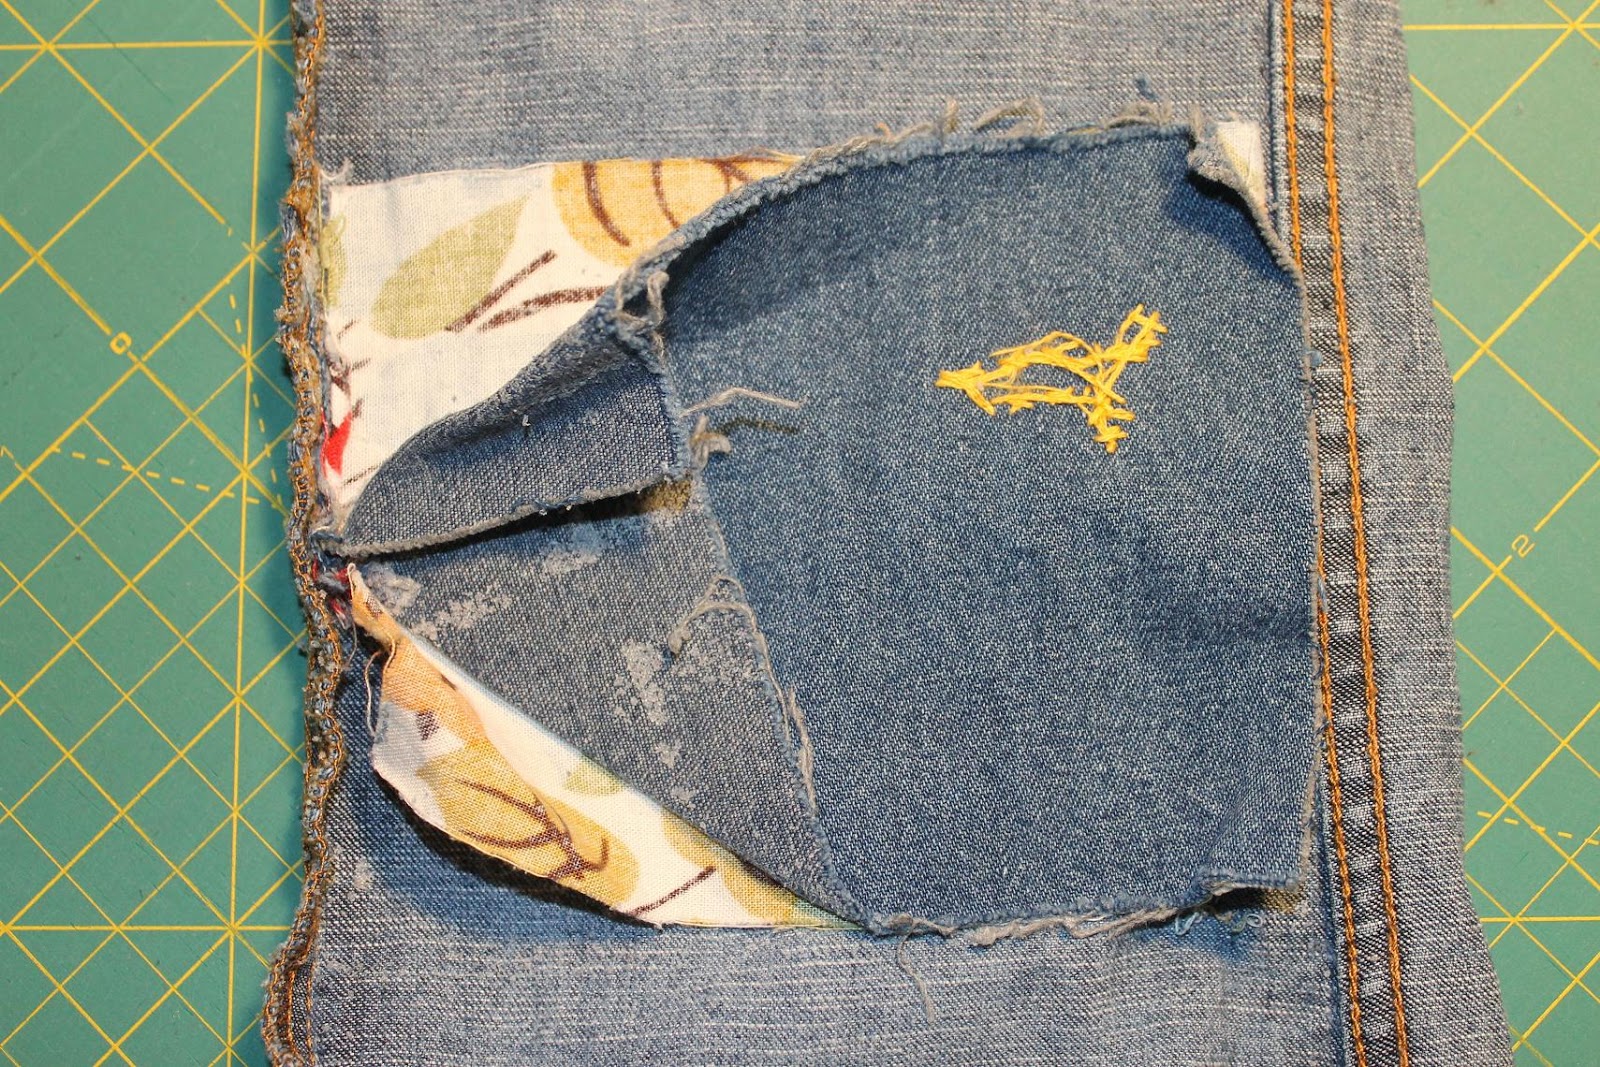  Inside Patches For Jeans